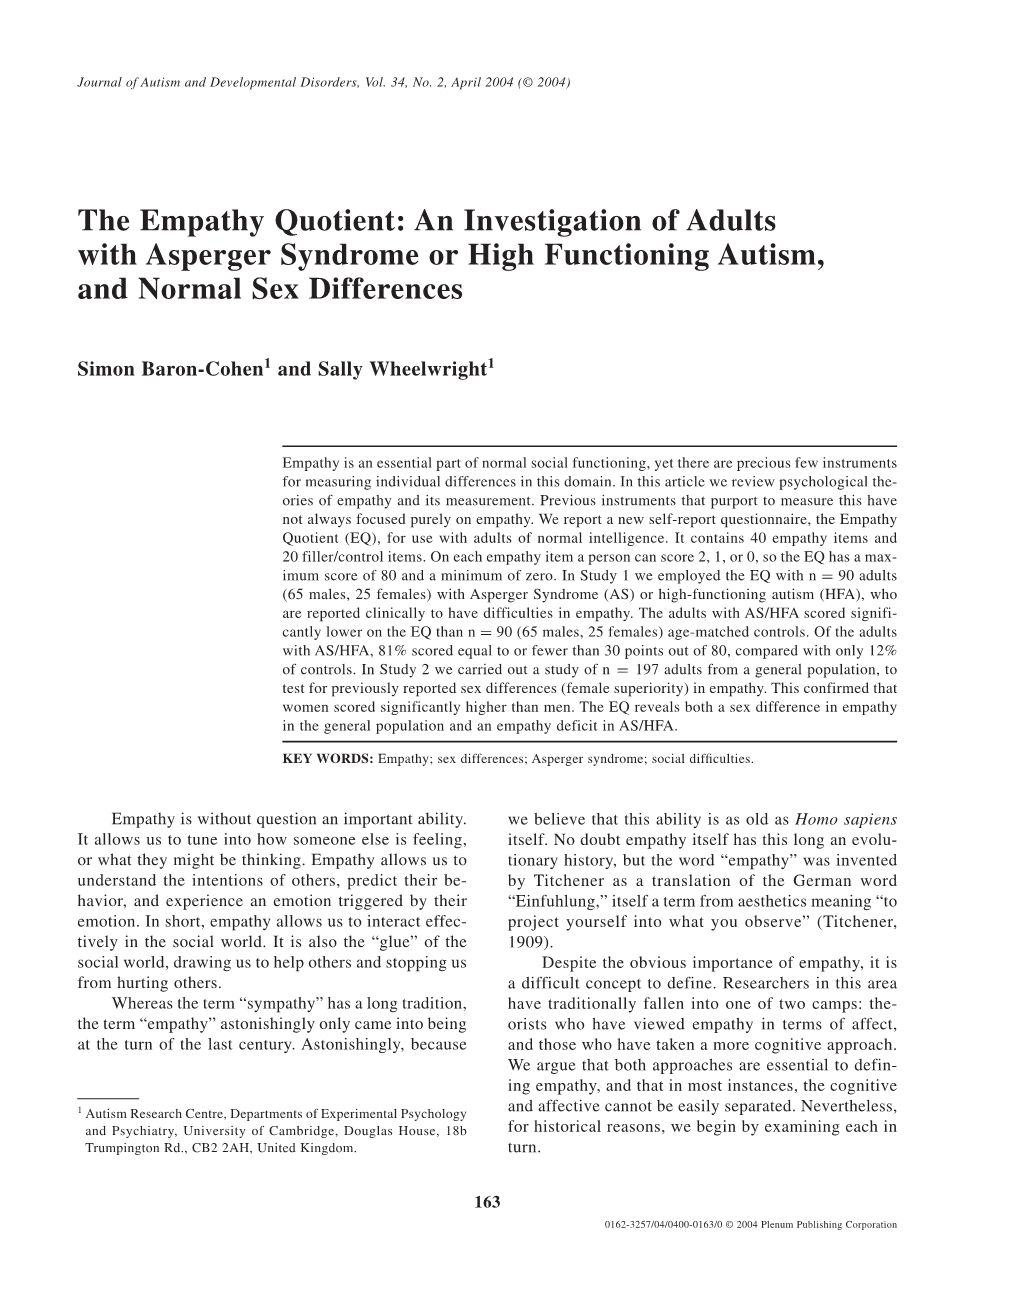 The Empathy Quotient: an Investigation of Adults with Asperger Syndrome Or High Functioning Autism, and Normal Sex Differences